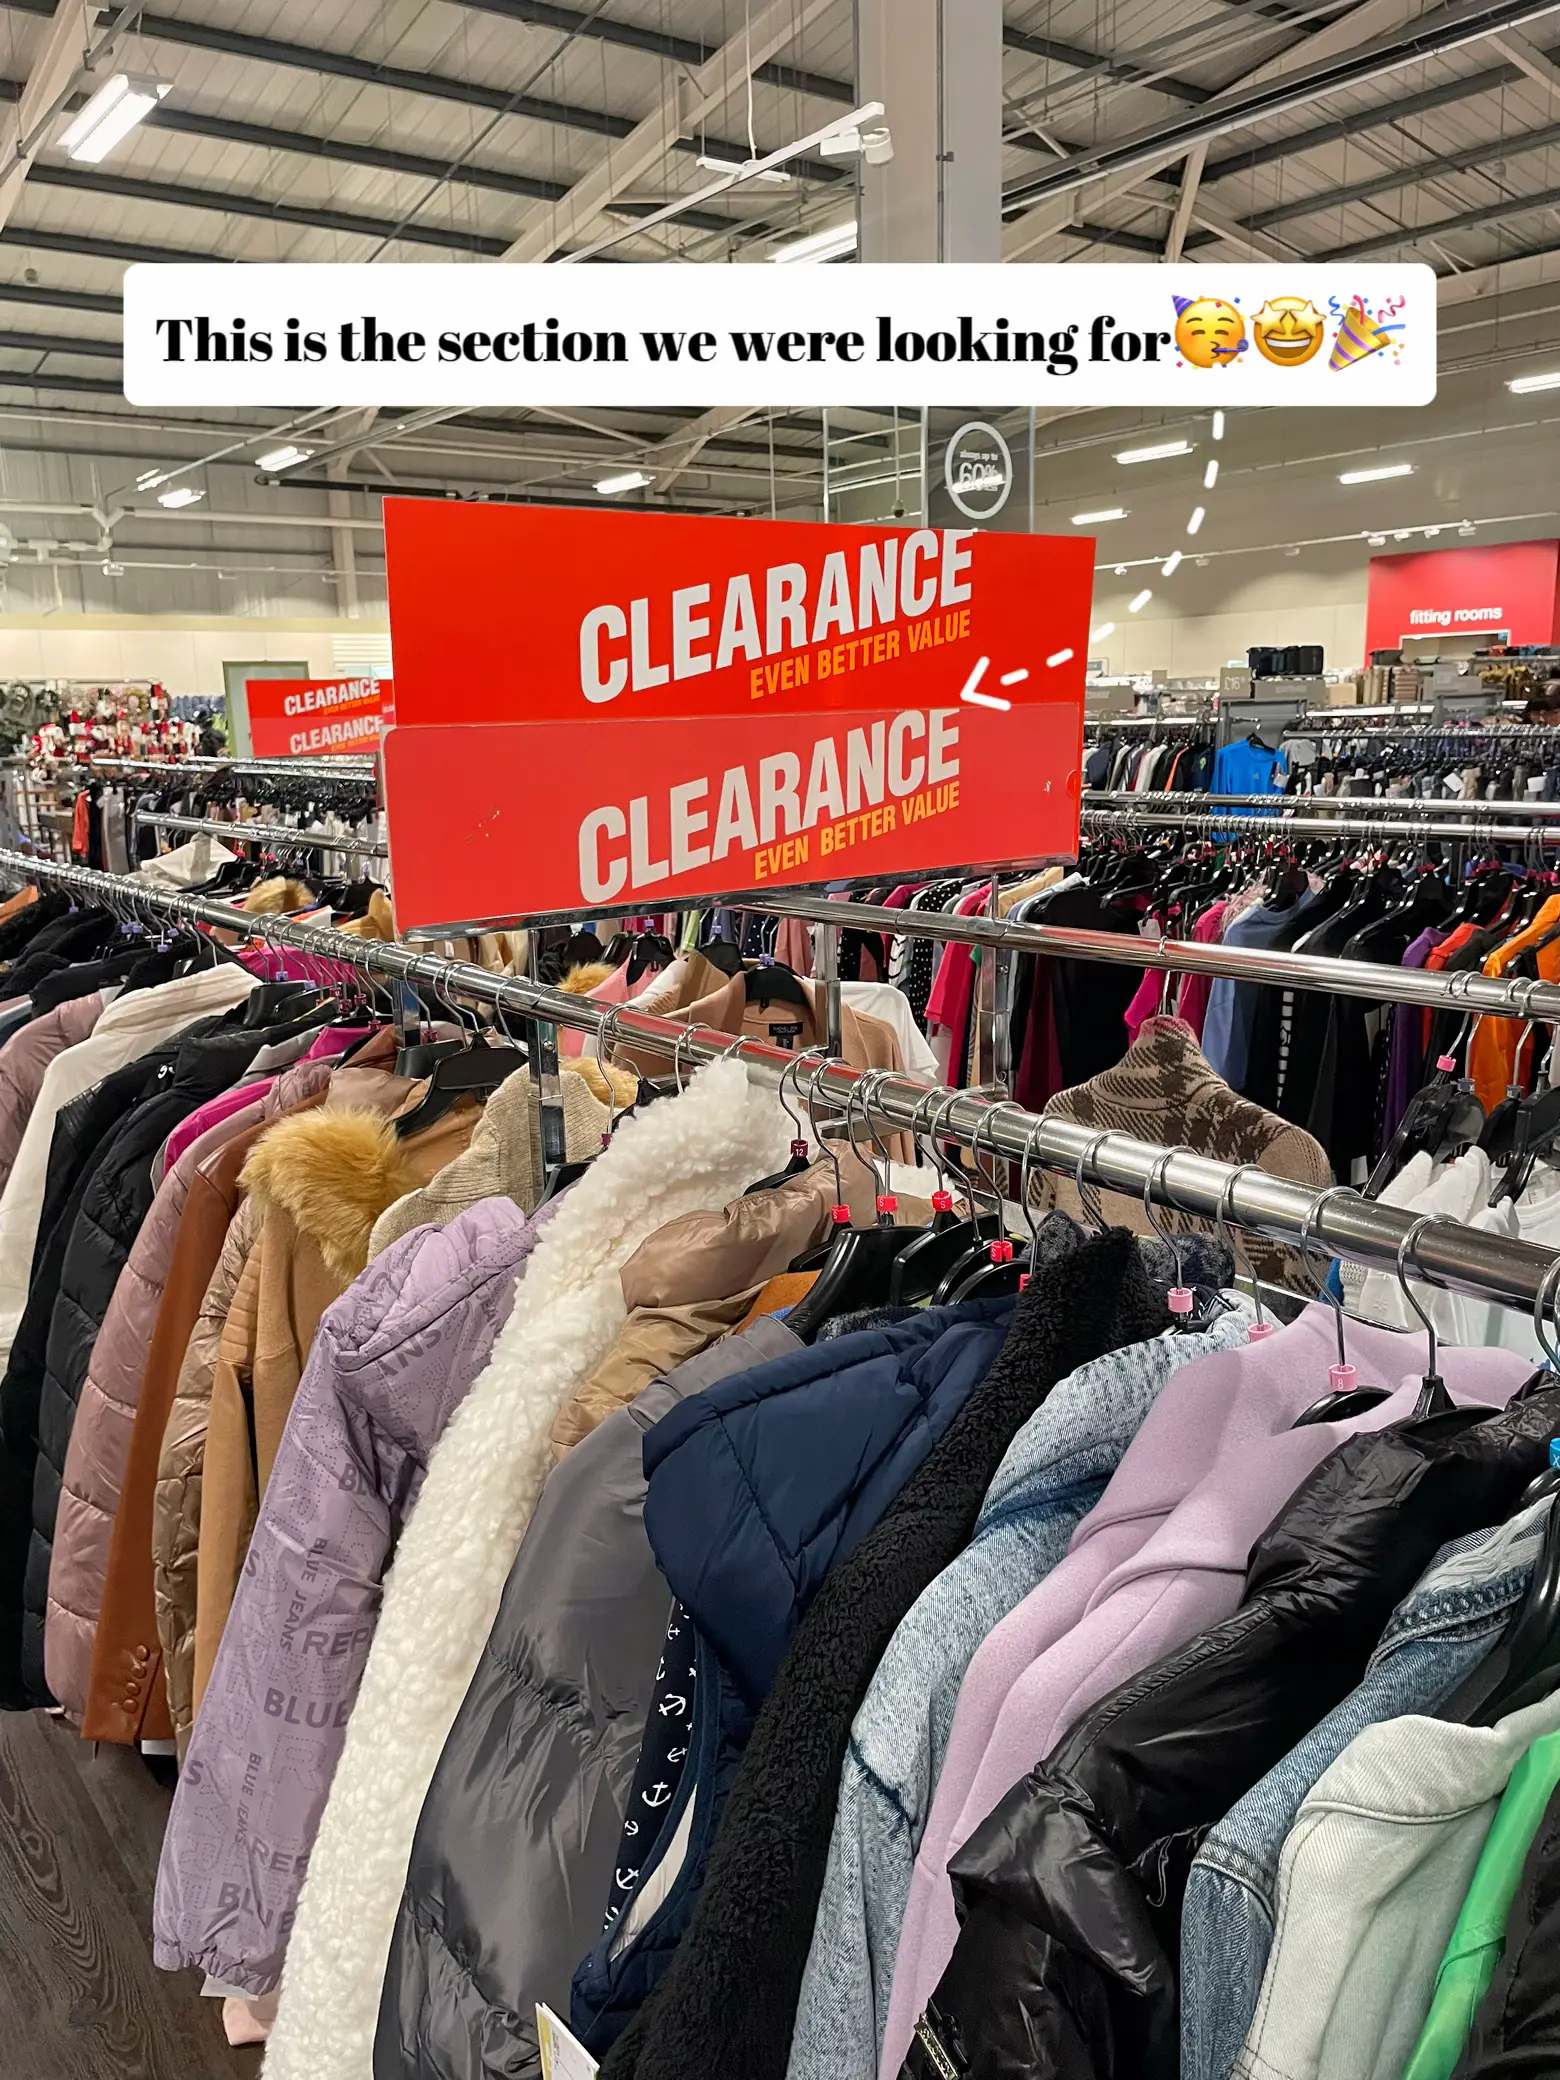 31 TK Maxx hacks definitely worth remembering for your next visit -  Liverpool Echo